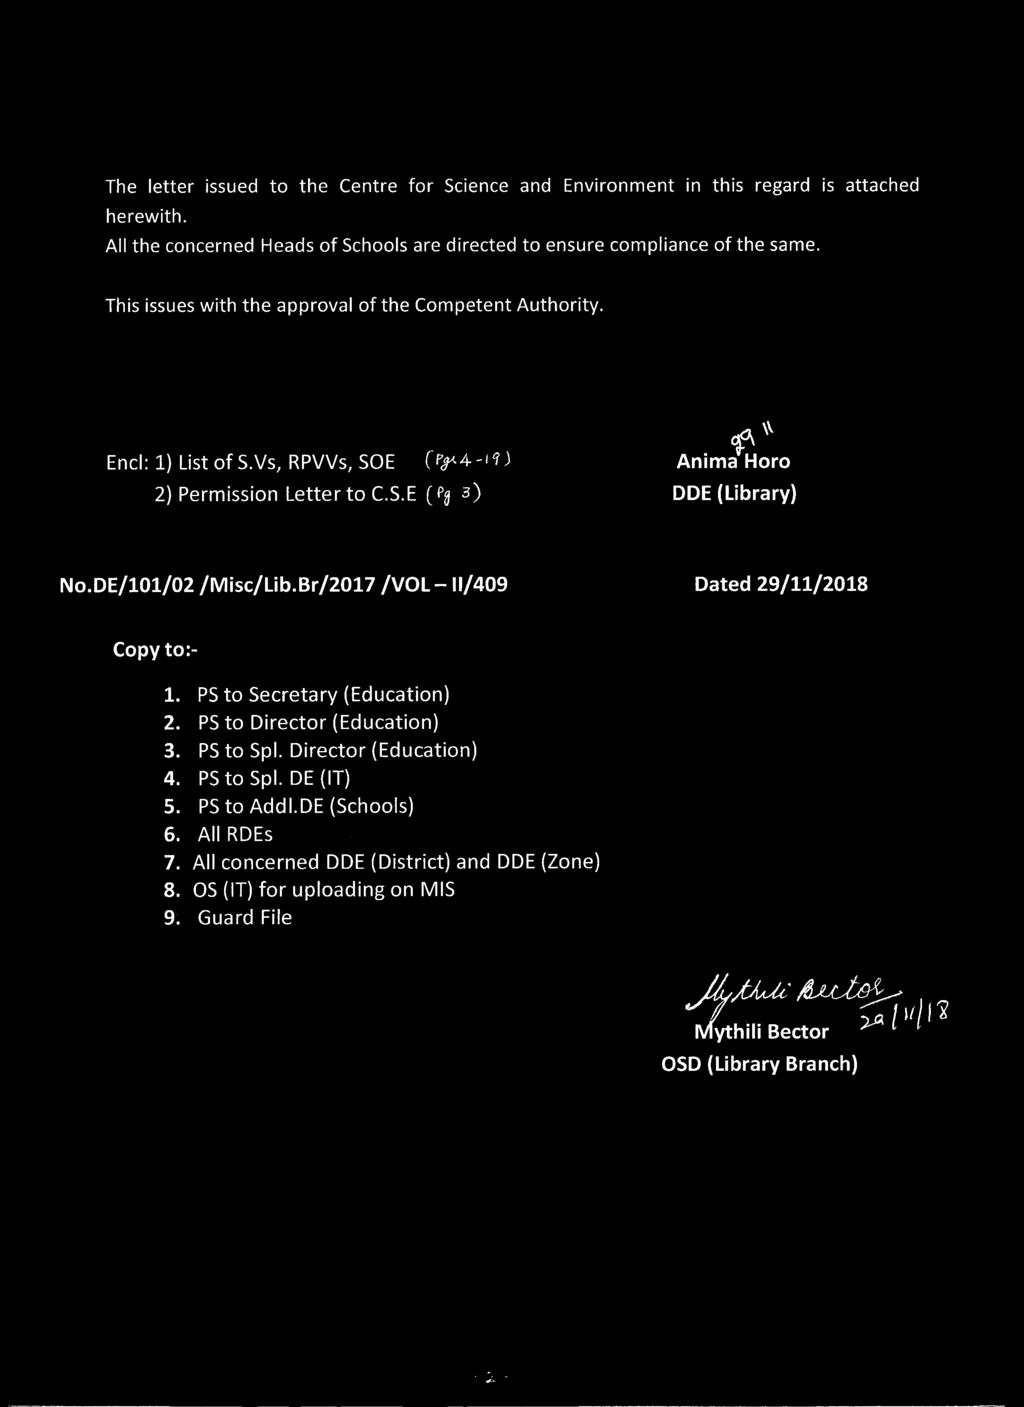 DE/101/02 /Misc/Lib.Br/2017 /VOL 11/409 Dated 29/11/2018 Copy to:- 1. PS to Secretary (Education) 2. PS to Director (Education) 3. PS to SO. Director (Education) 4. PS to Spl.